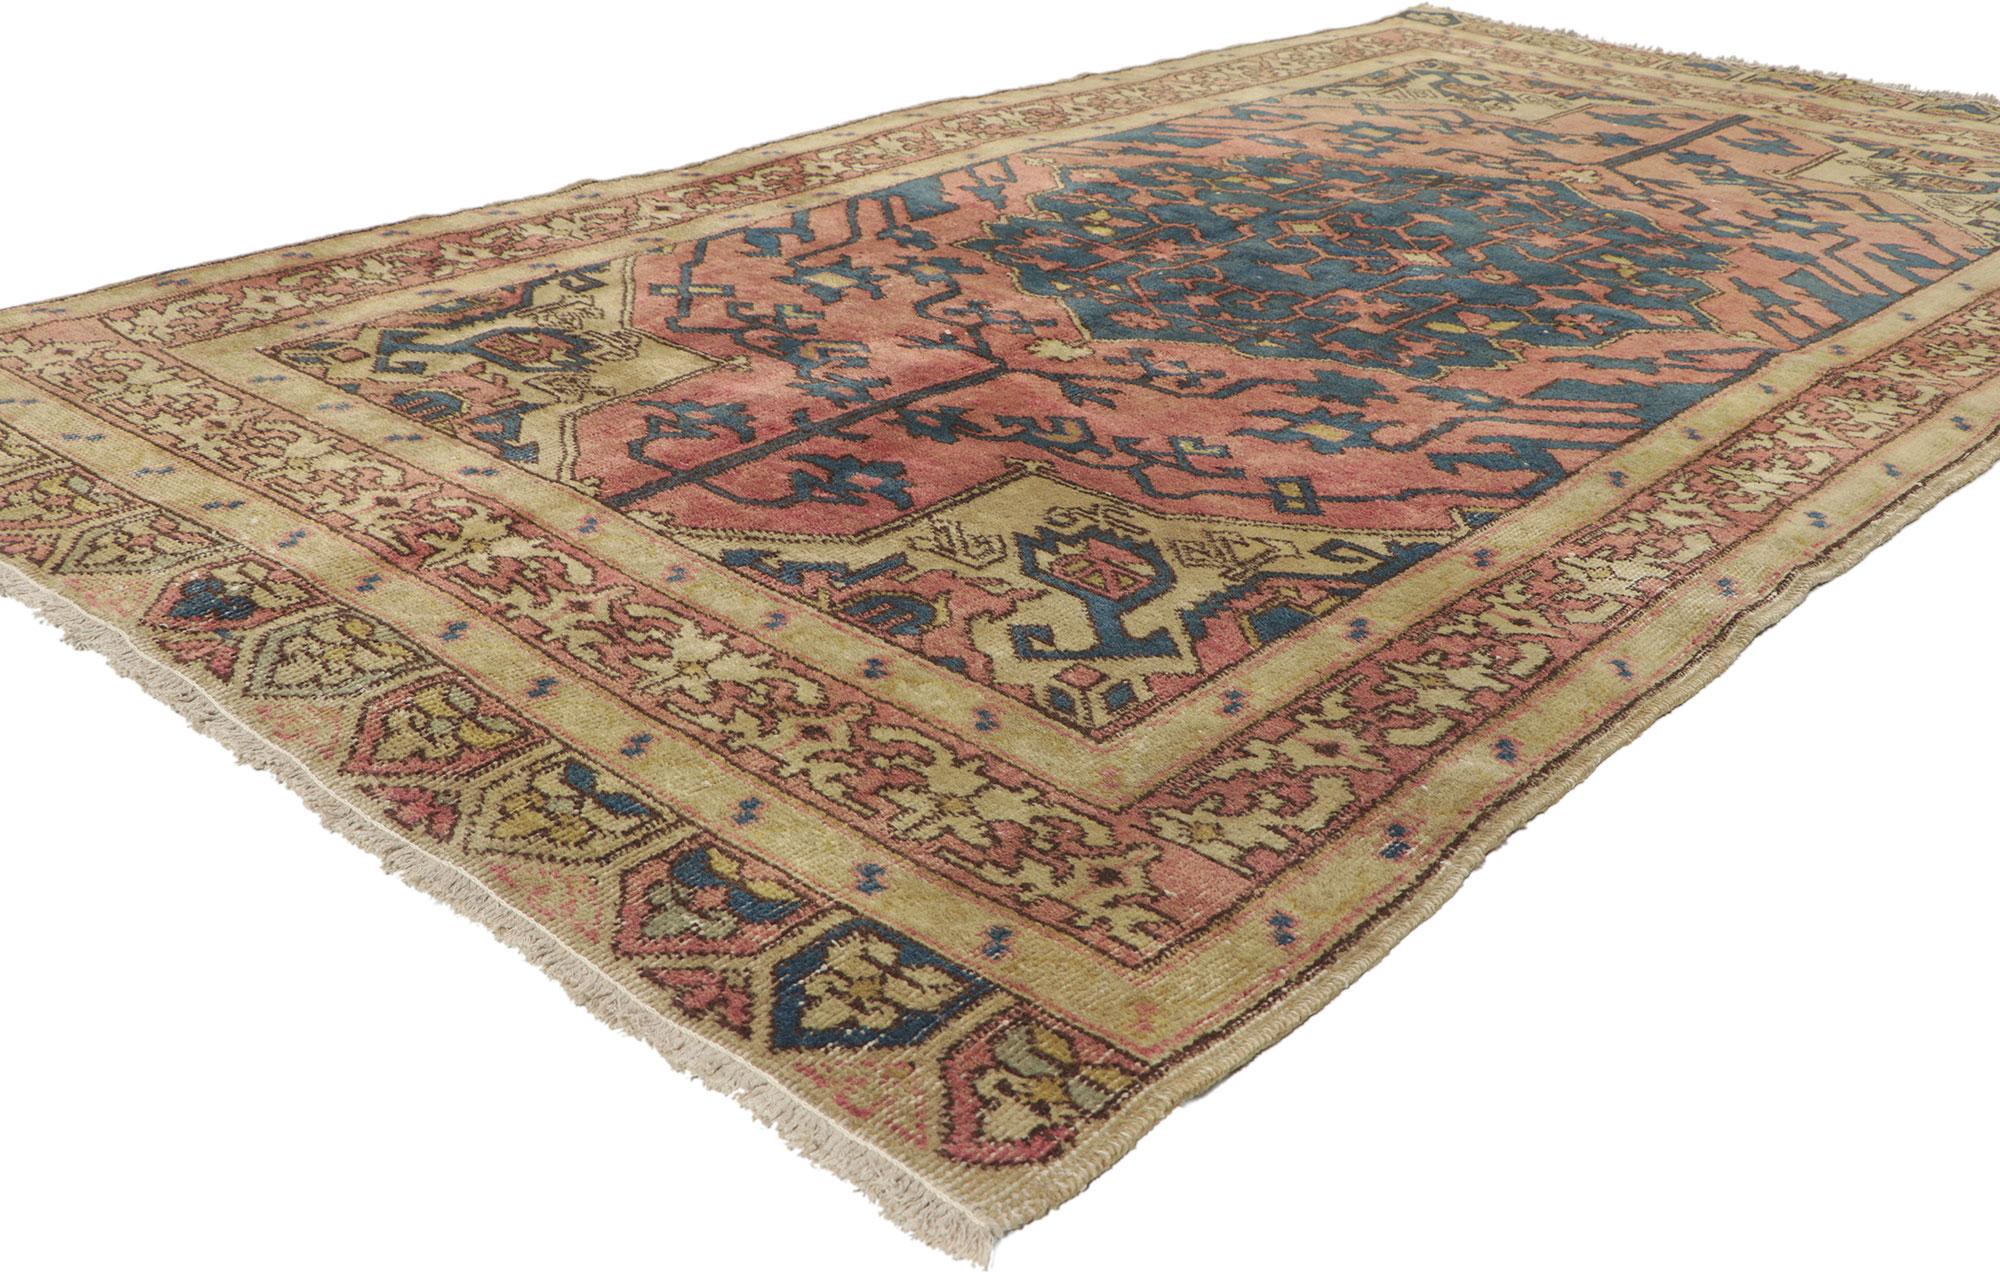 Pair of Matching Vintage Turkish Sivas Rugs with Rustic Earth-Tone Colors For Sale 3